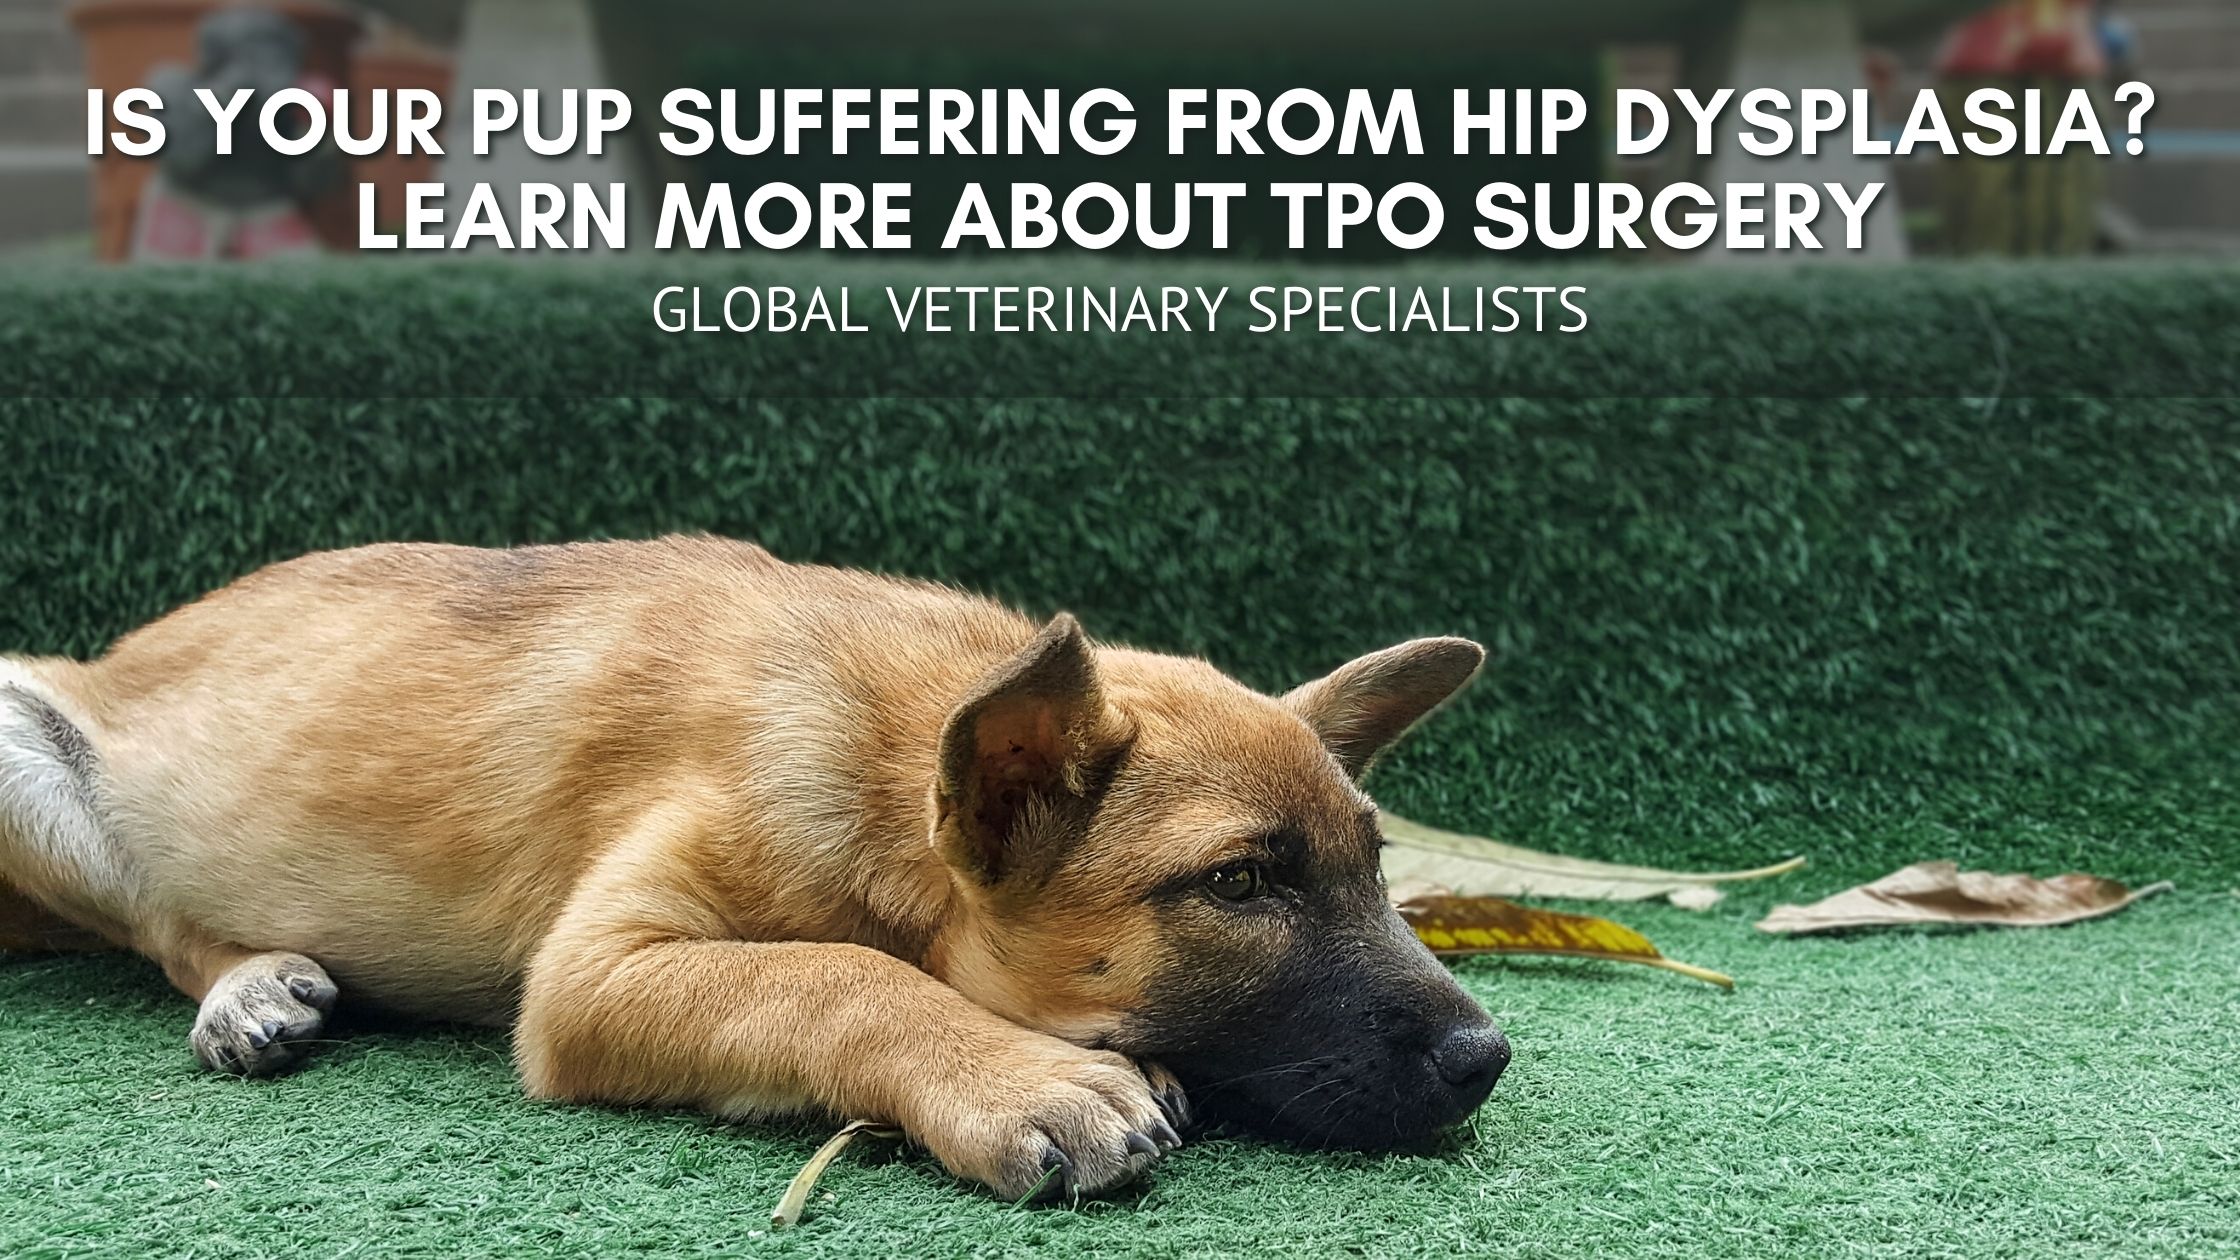 Is Your Pup Suffering From Hip Dysplasia? Learn More About TPO Surgery